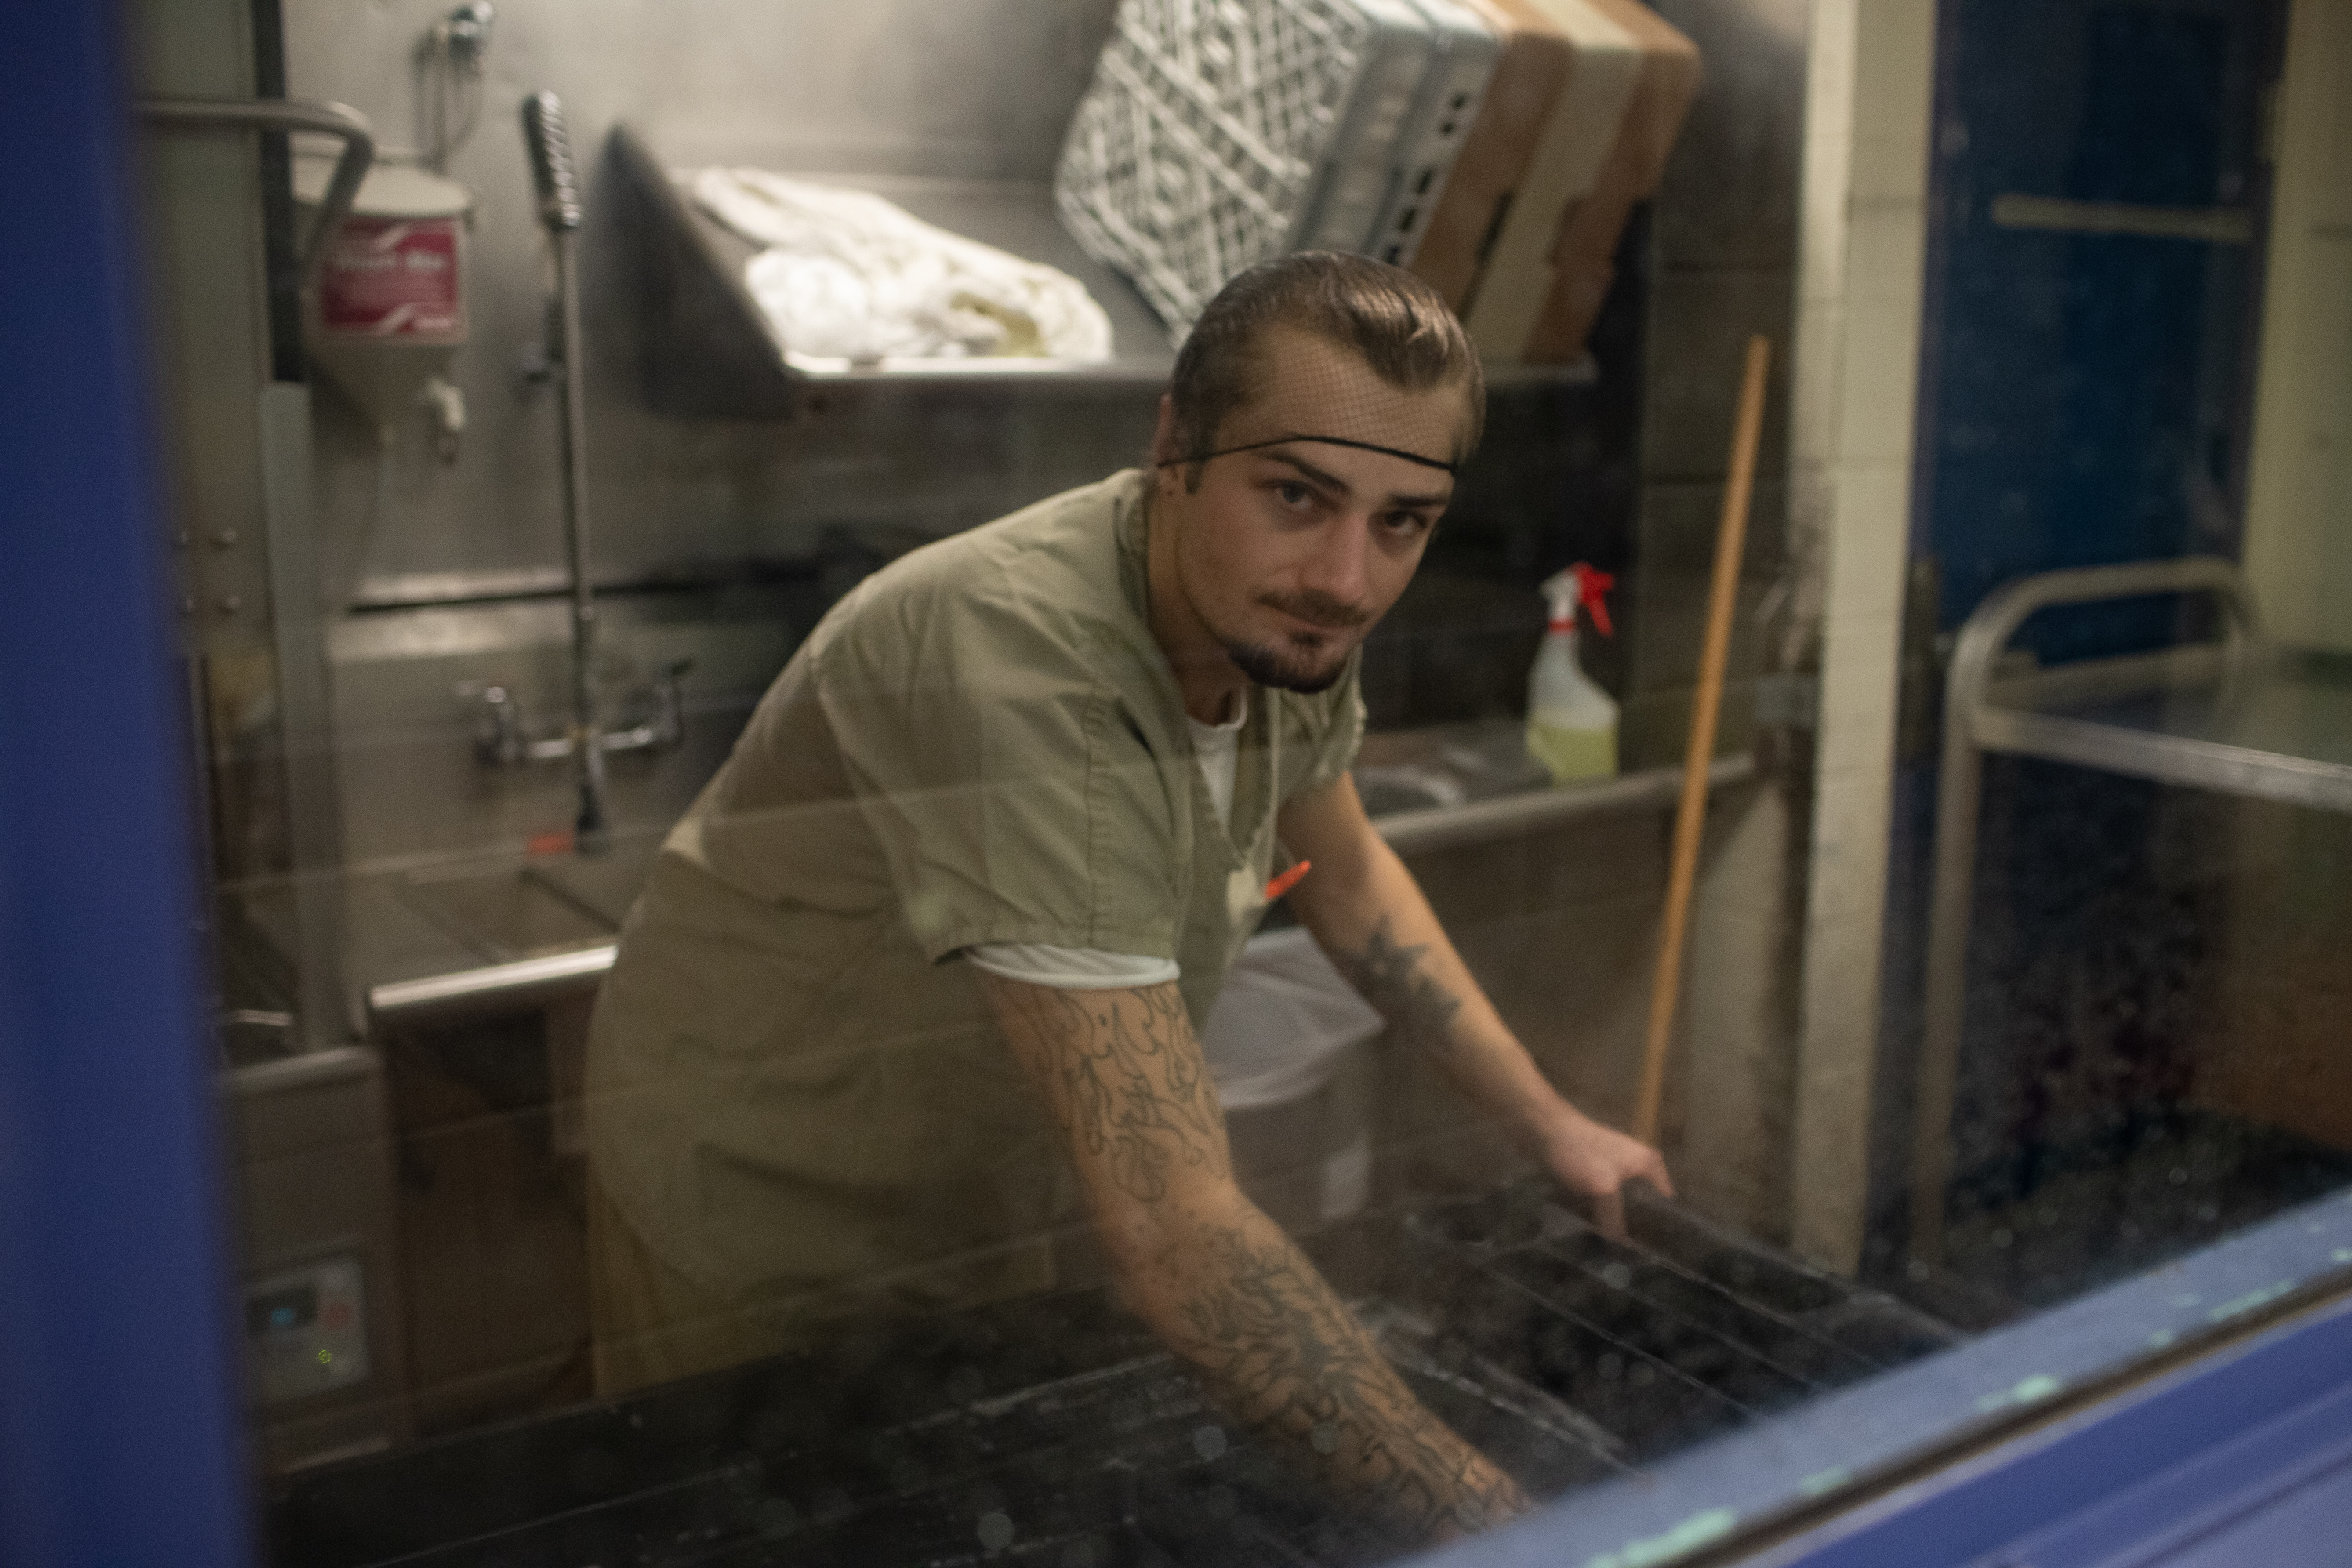 An inmate sanitizes a food cart in the jail kitchen. A moldy substance is visible on the walls and ceiling.